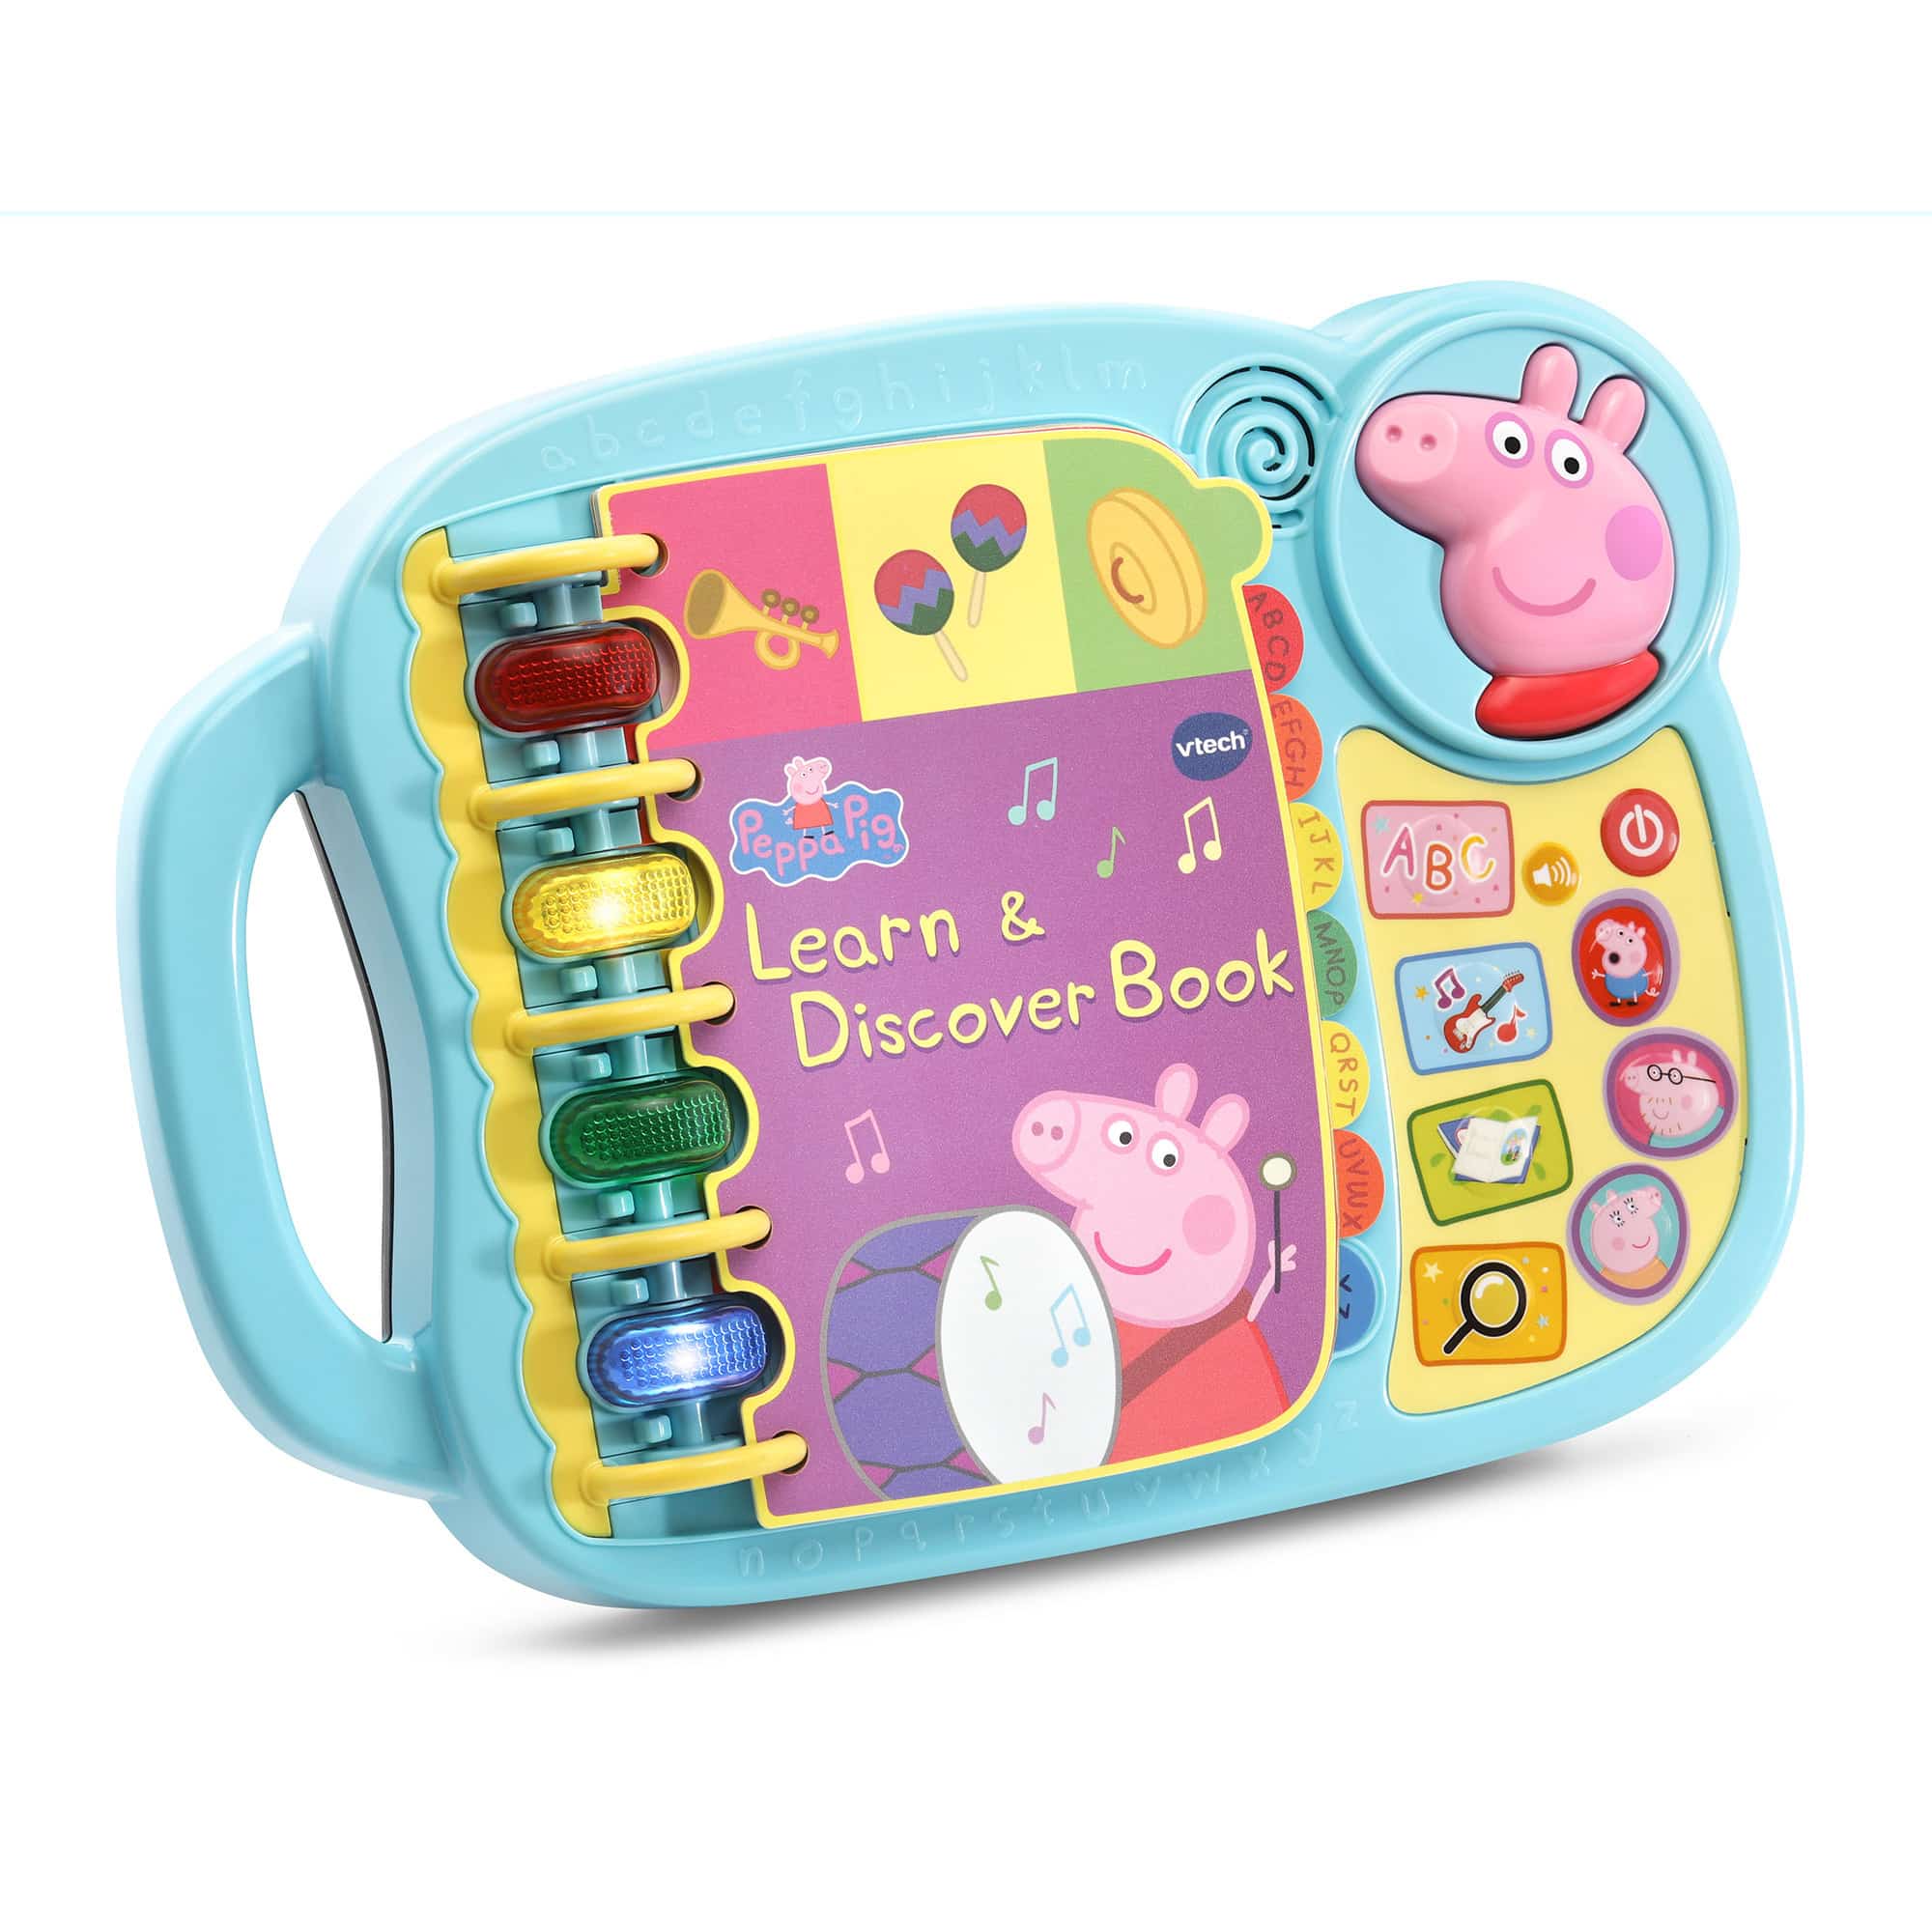 Vtech - Peppa Pig Learn & Discover Book